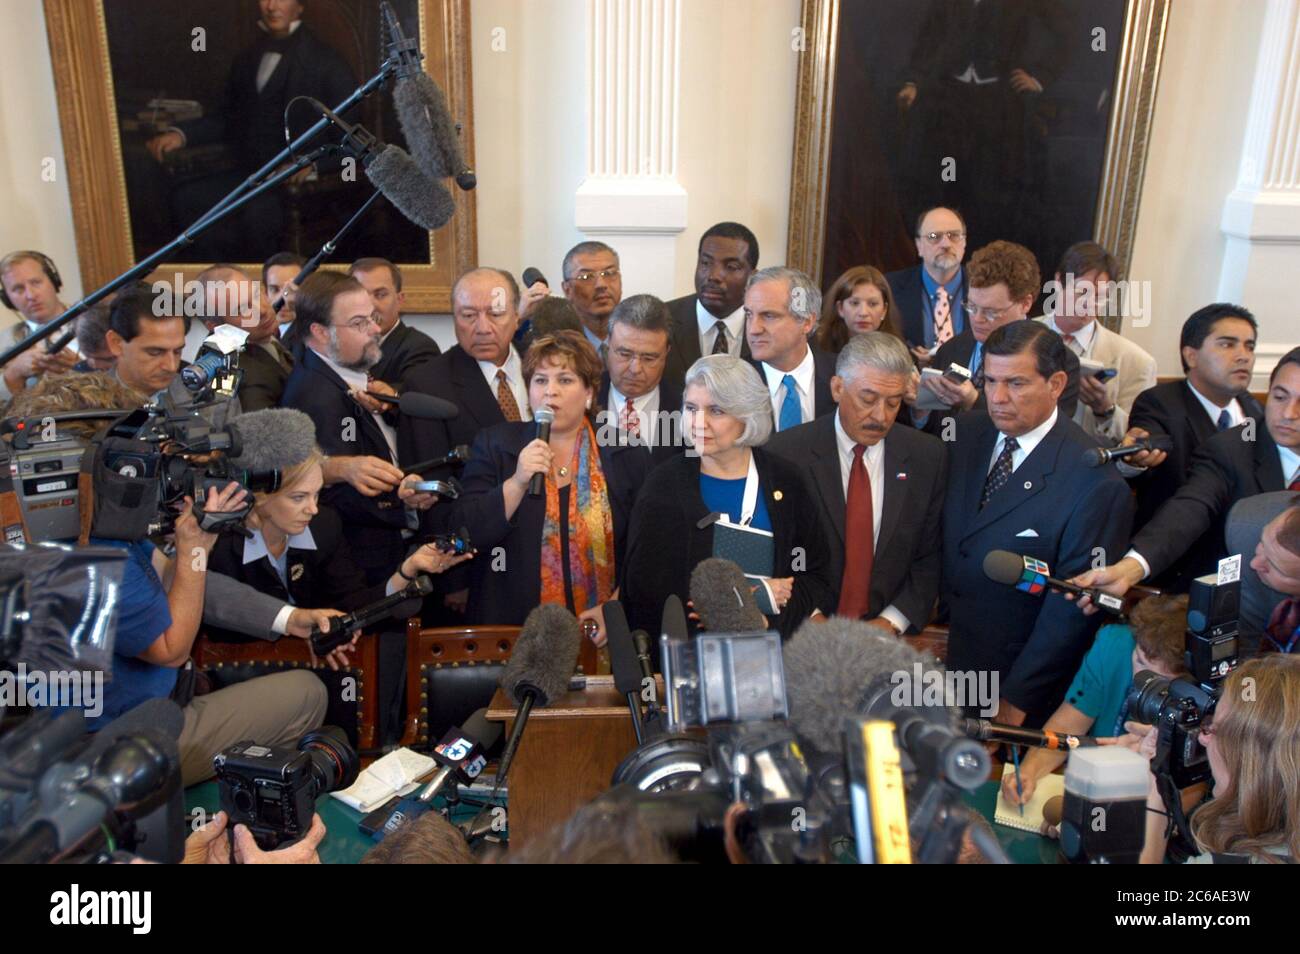 September 15, 2003: Texas' absent Democratic senators, who spent more than six weeks in exile in New Mexico, return Monday to the State Capitol to the rousing cheers of a Senate gallery packed with Democratic supporters.  Senate decorum was non-existent as legislators, media and spectators swarmed the chamber in a historic moment for Texas. ©Bob Daemmrich Stock Photo